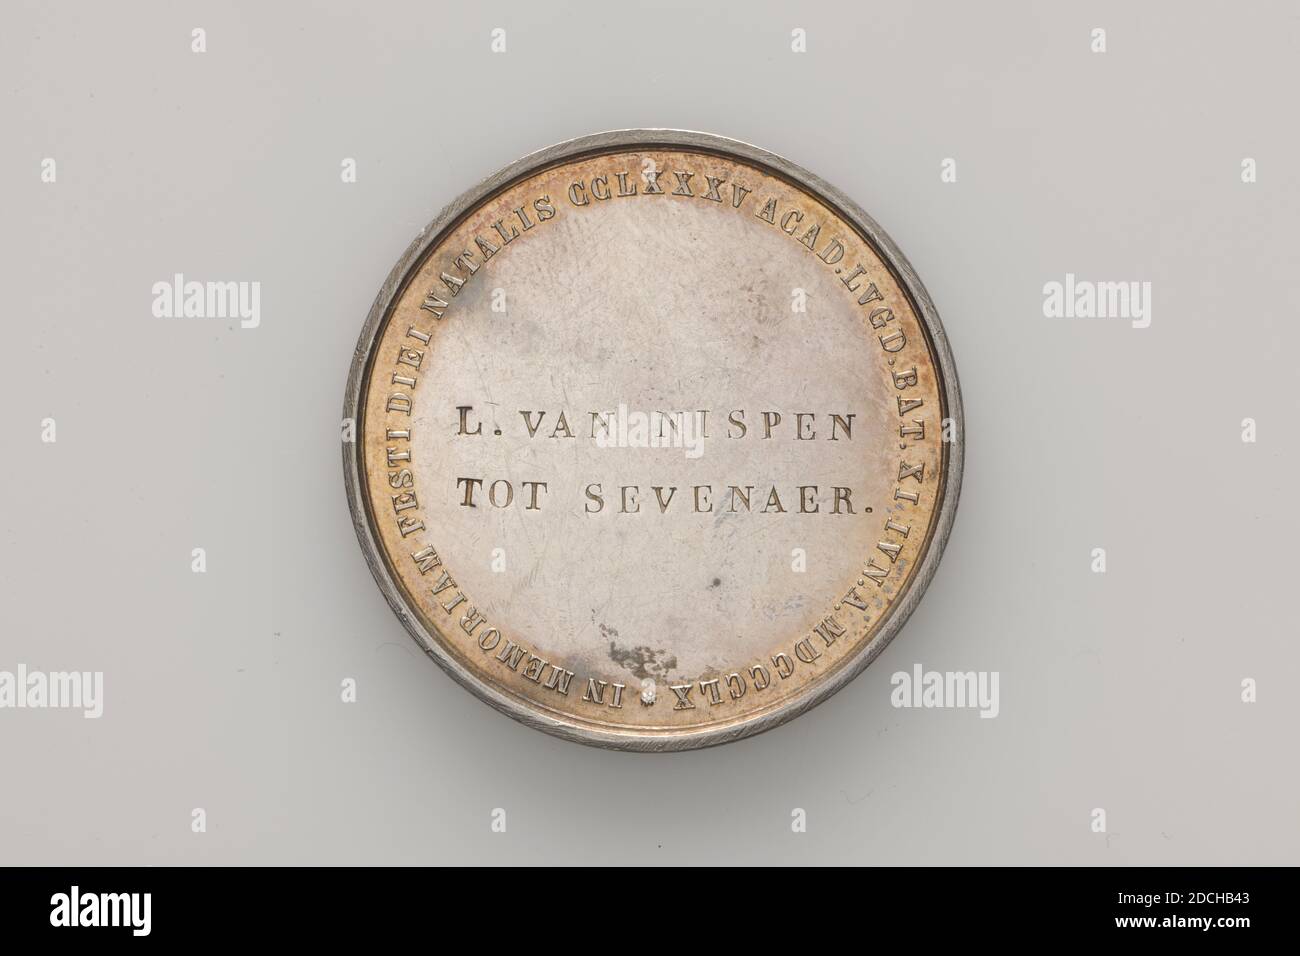 medal, Anonymous, 1860, minted, General: 3.1 x 0.3cm 31 x 3mm, Weight: 12.2g, Bronze medal on the masquerade at the anniversary of Leiden University in 1860. The subject of the masquerade was the entry and inauguration of Frans, Duke of Anjou, Alençon, Berry, etc. in 1682. On the front is depicted the Duke Frans van Anjou, wearing a beret and a wide cloak on his head . Above the performance the caption: FOVET ET DISCVTIT, and below MDLXXXII. On the back the inscription: IN MEMORIAM FESTI DIEI NATALIS CCLXXXV ACAD.LVGD.BAT.XI IVN.A.MDCCCLX, and an asterisk, man's portrait Stock Photo